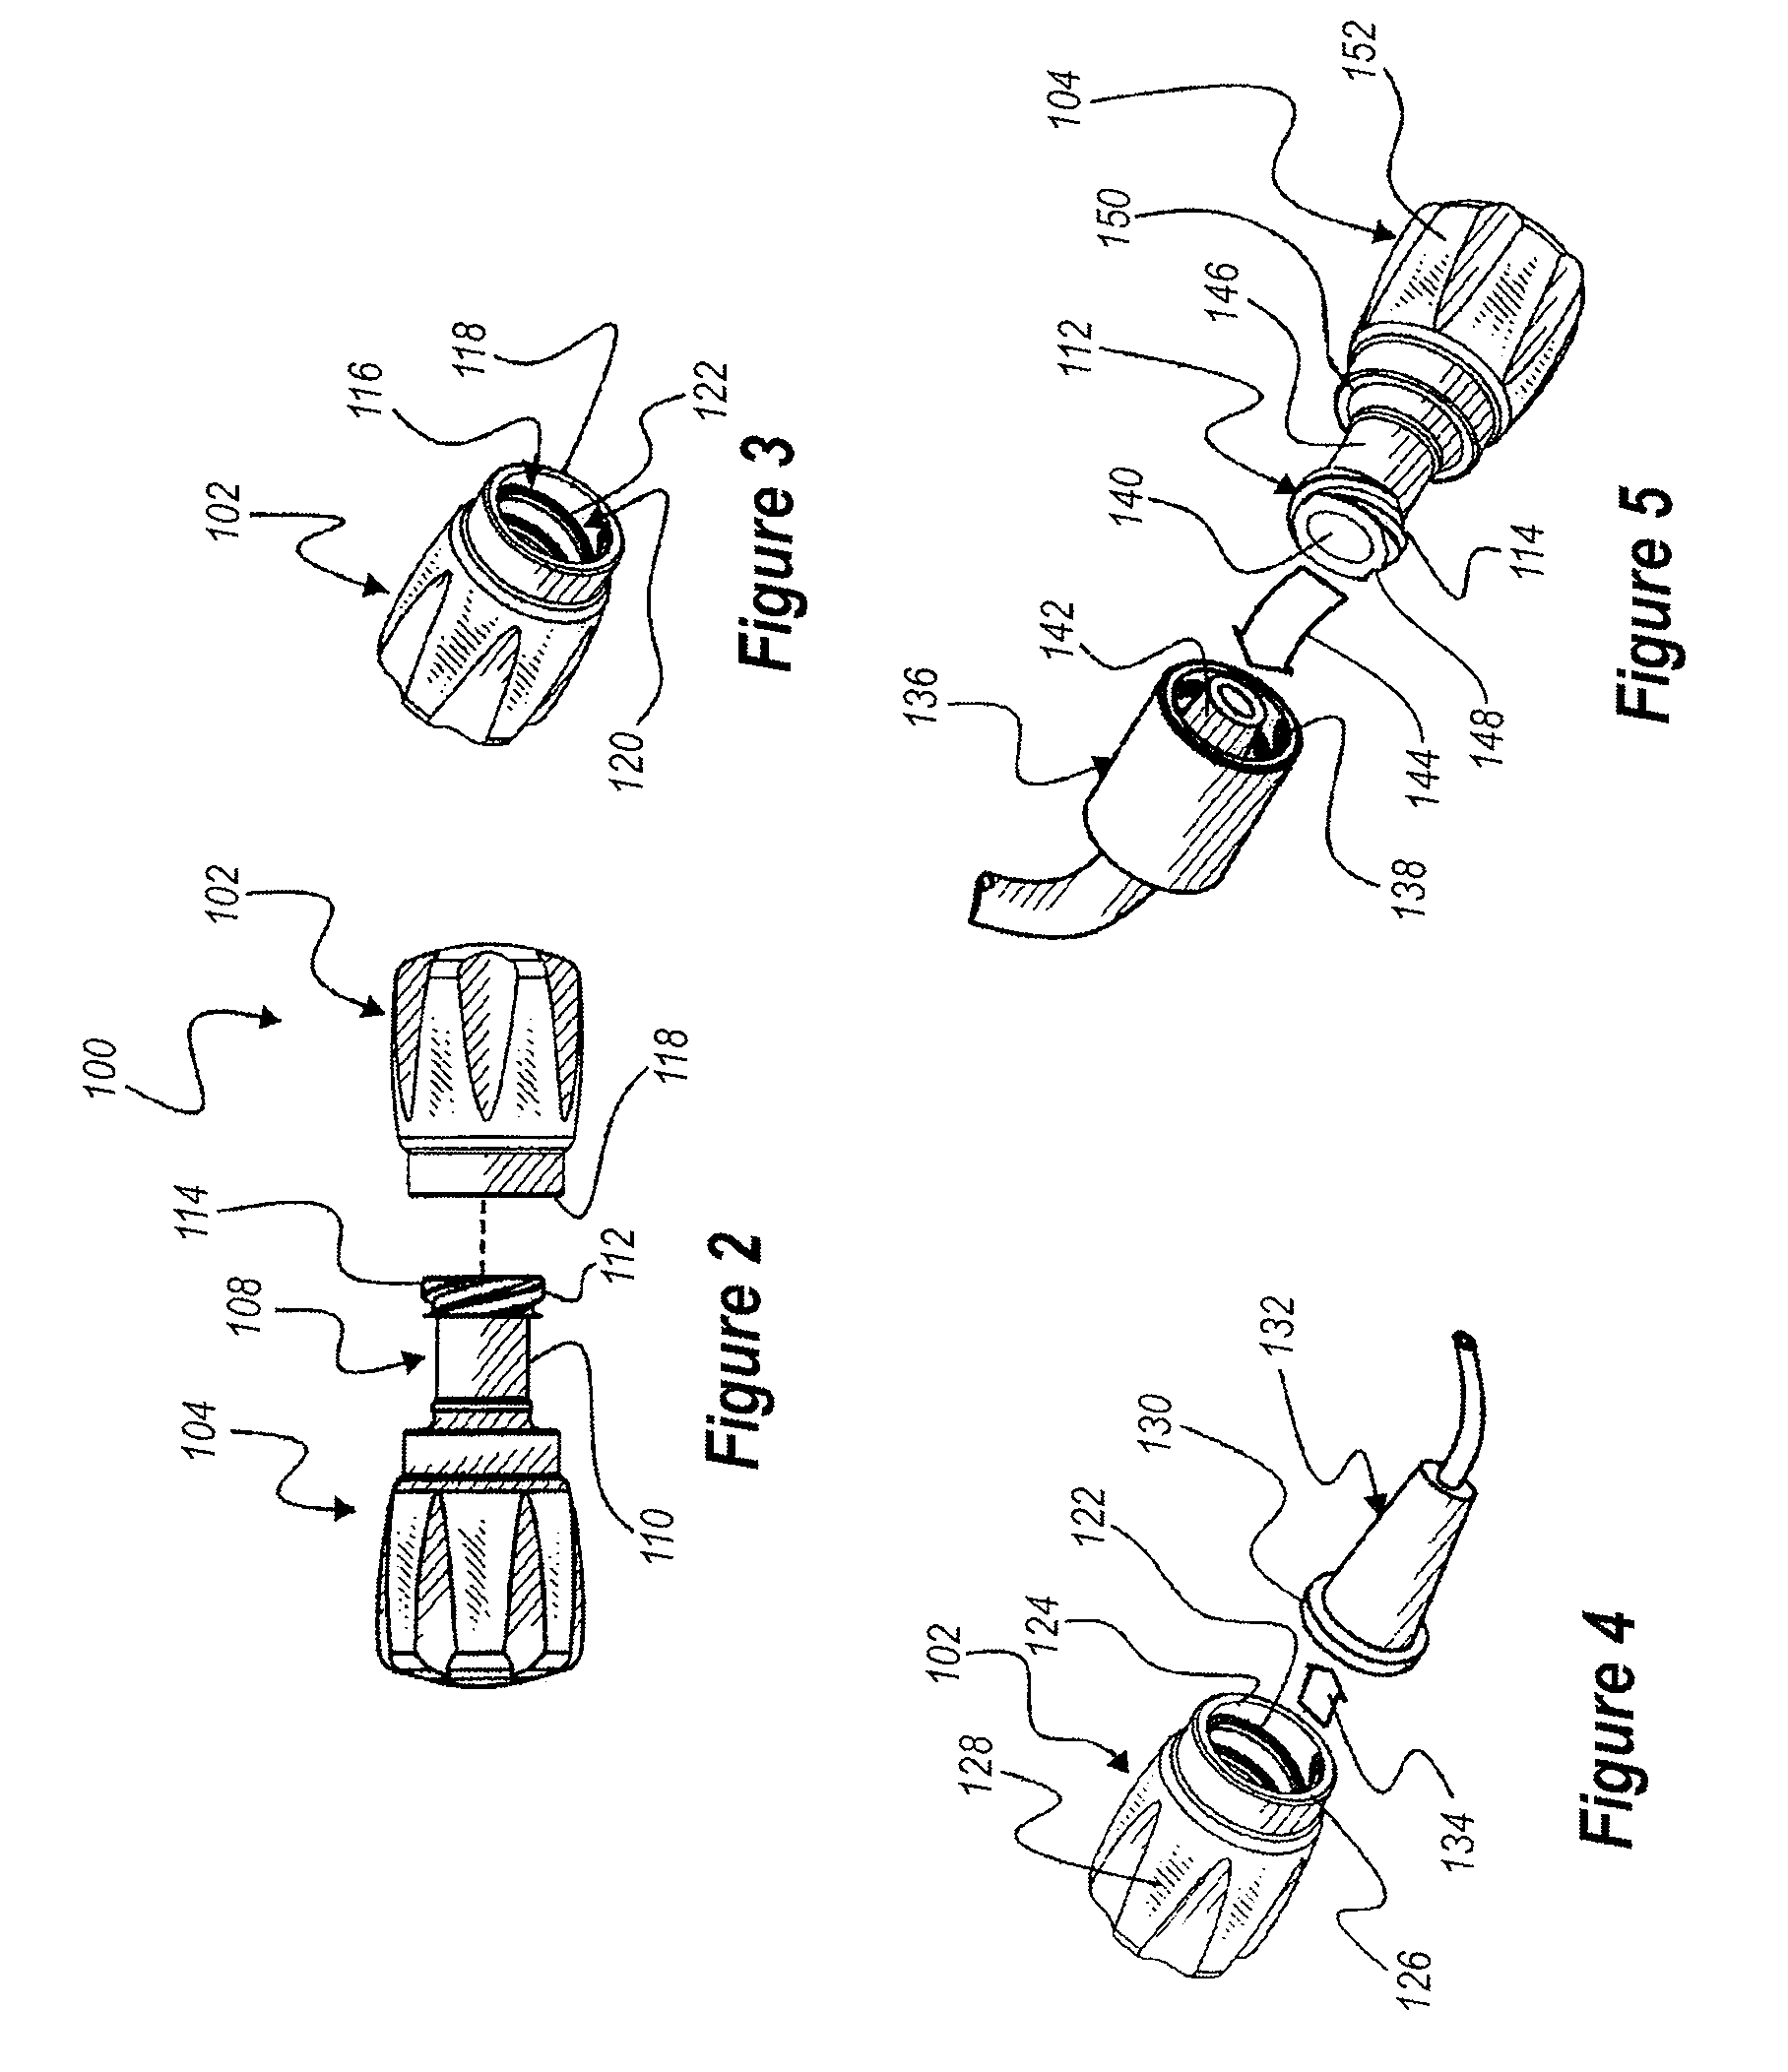 Methods for cleaning luer connectors